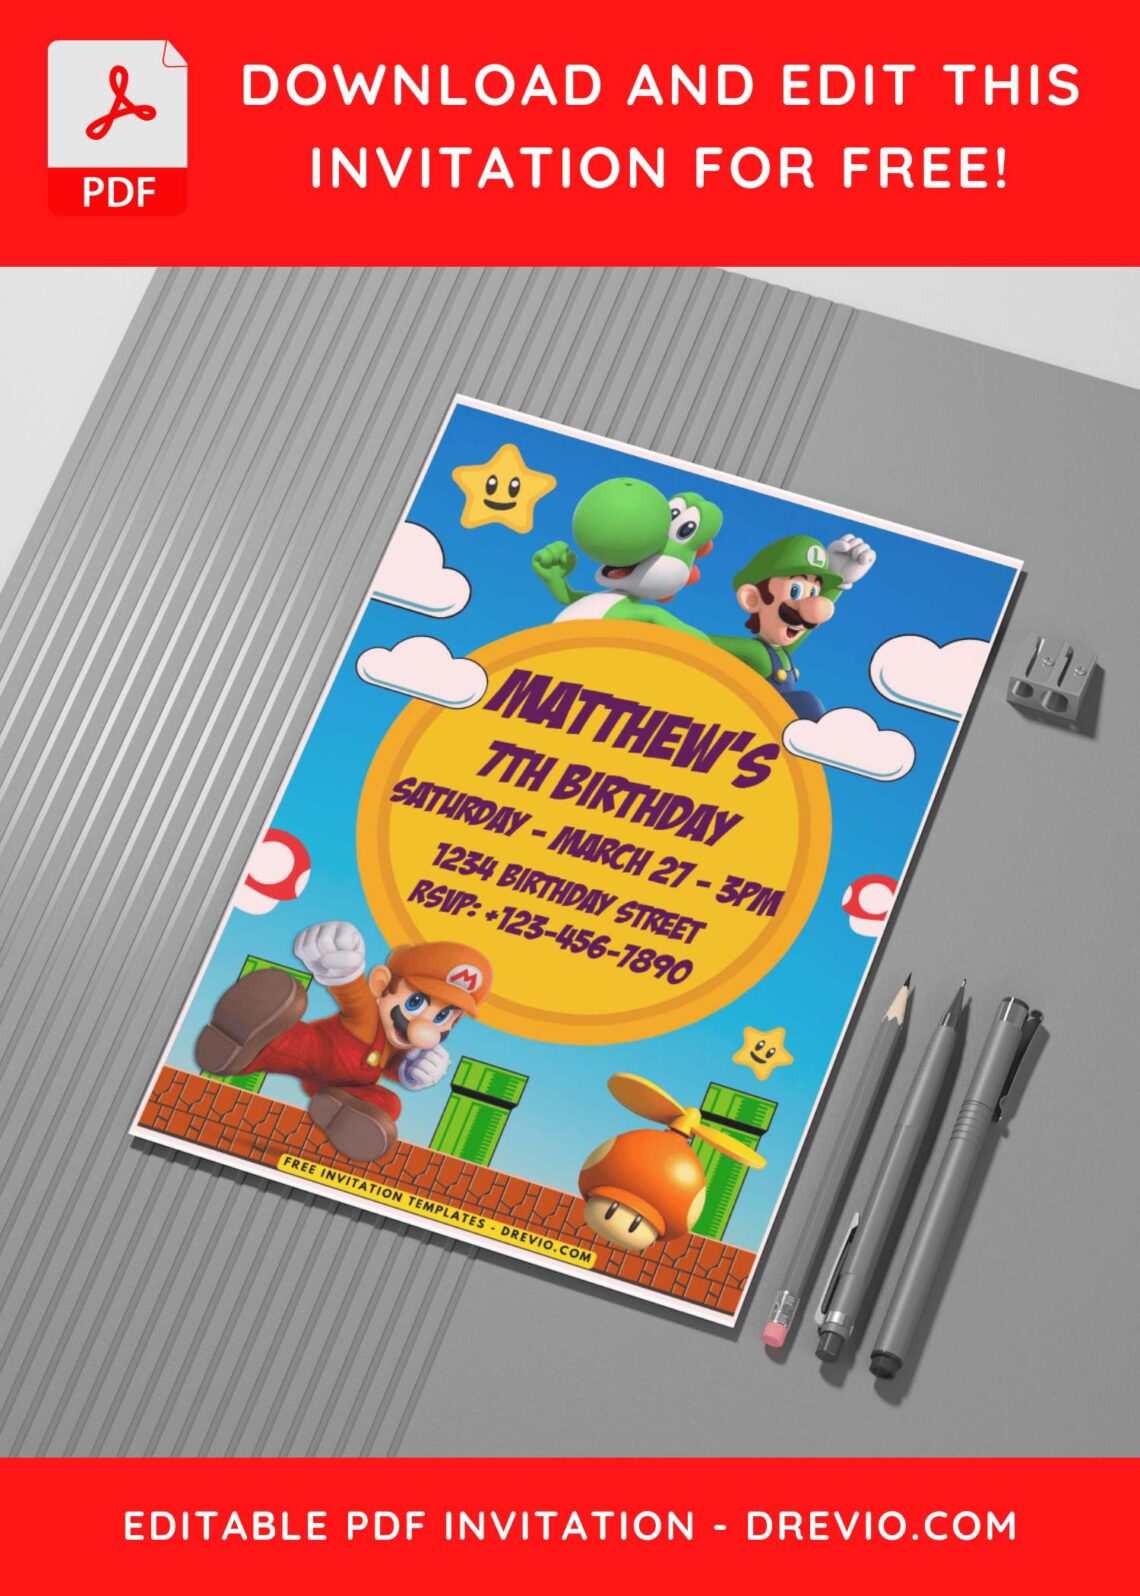 Super Mario Invitation Template Guide: Free Designs For Your Party! G